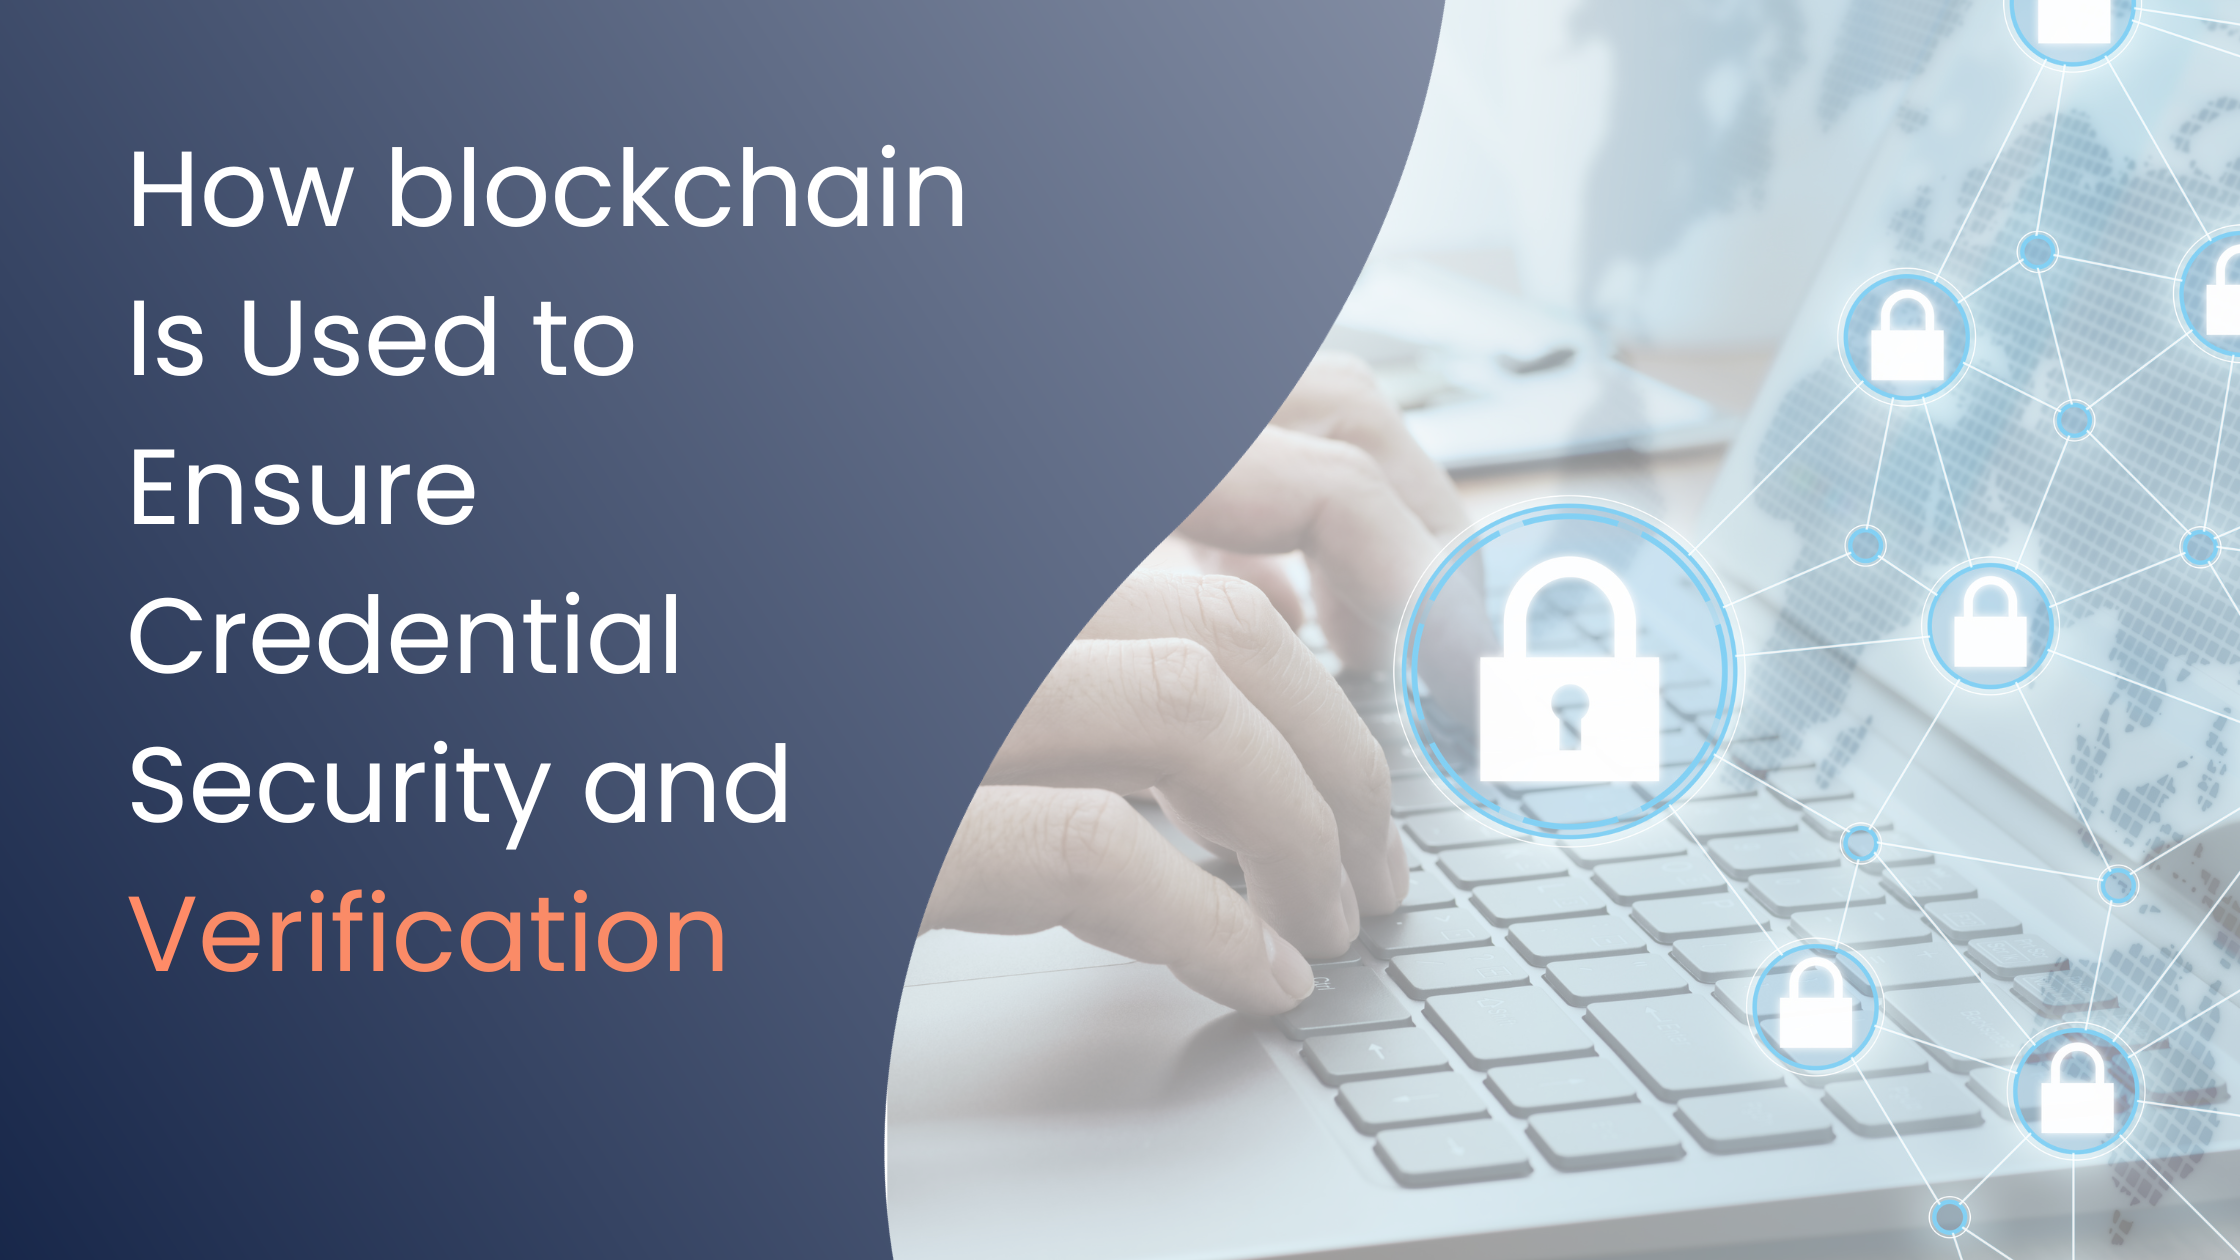 How Blockchain Is Used to Ensure Credential Security and Verification